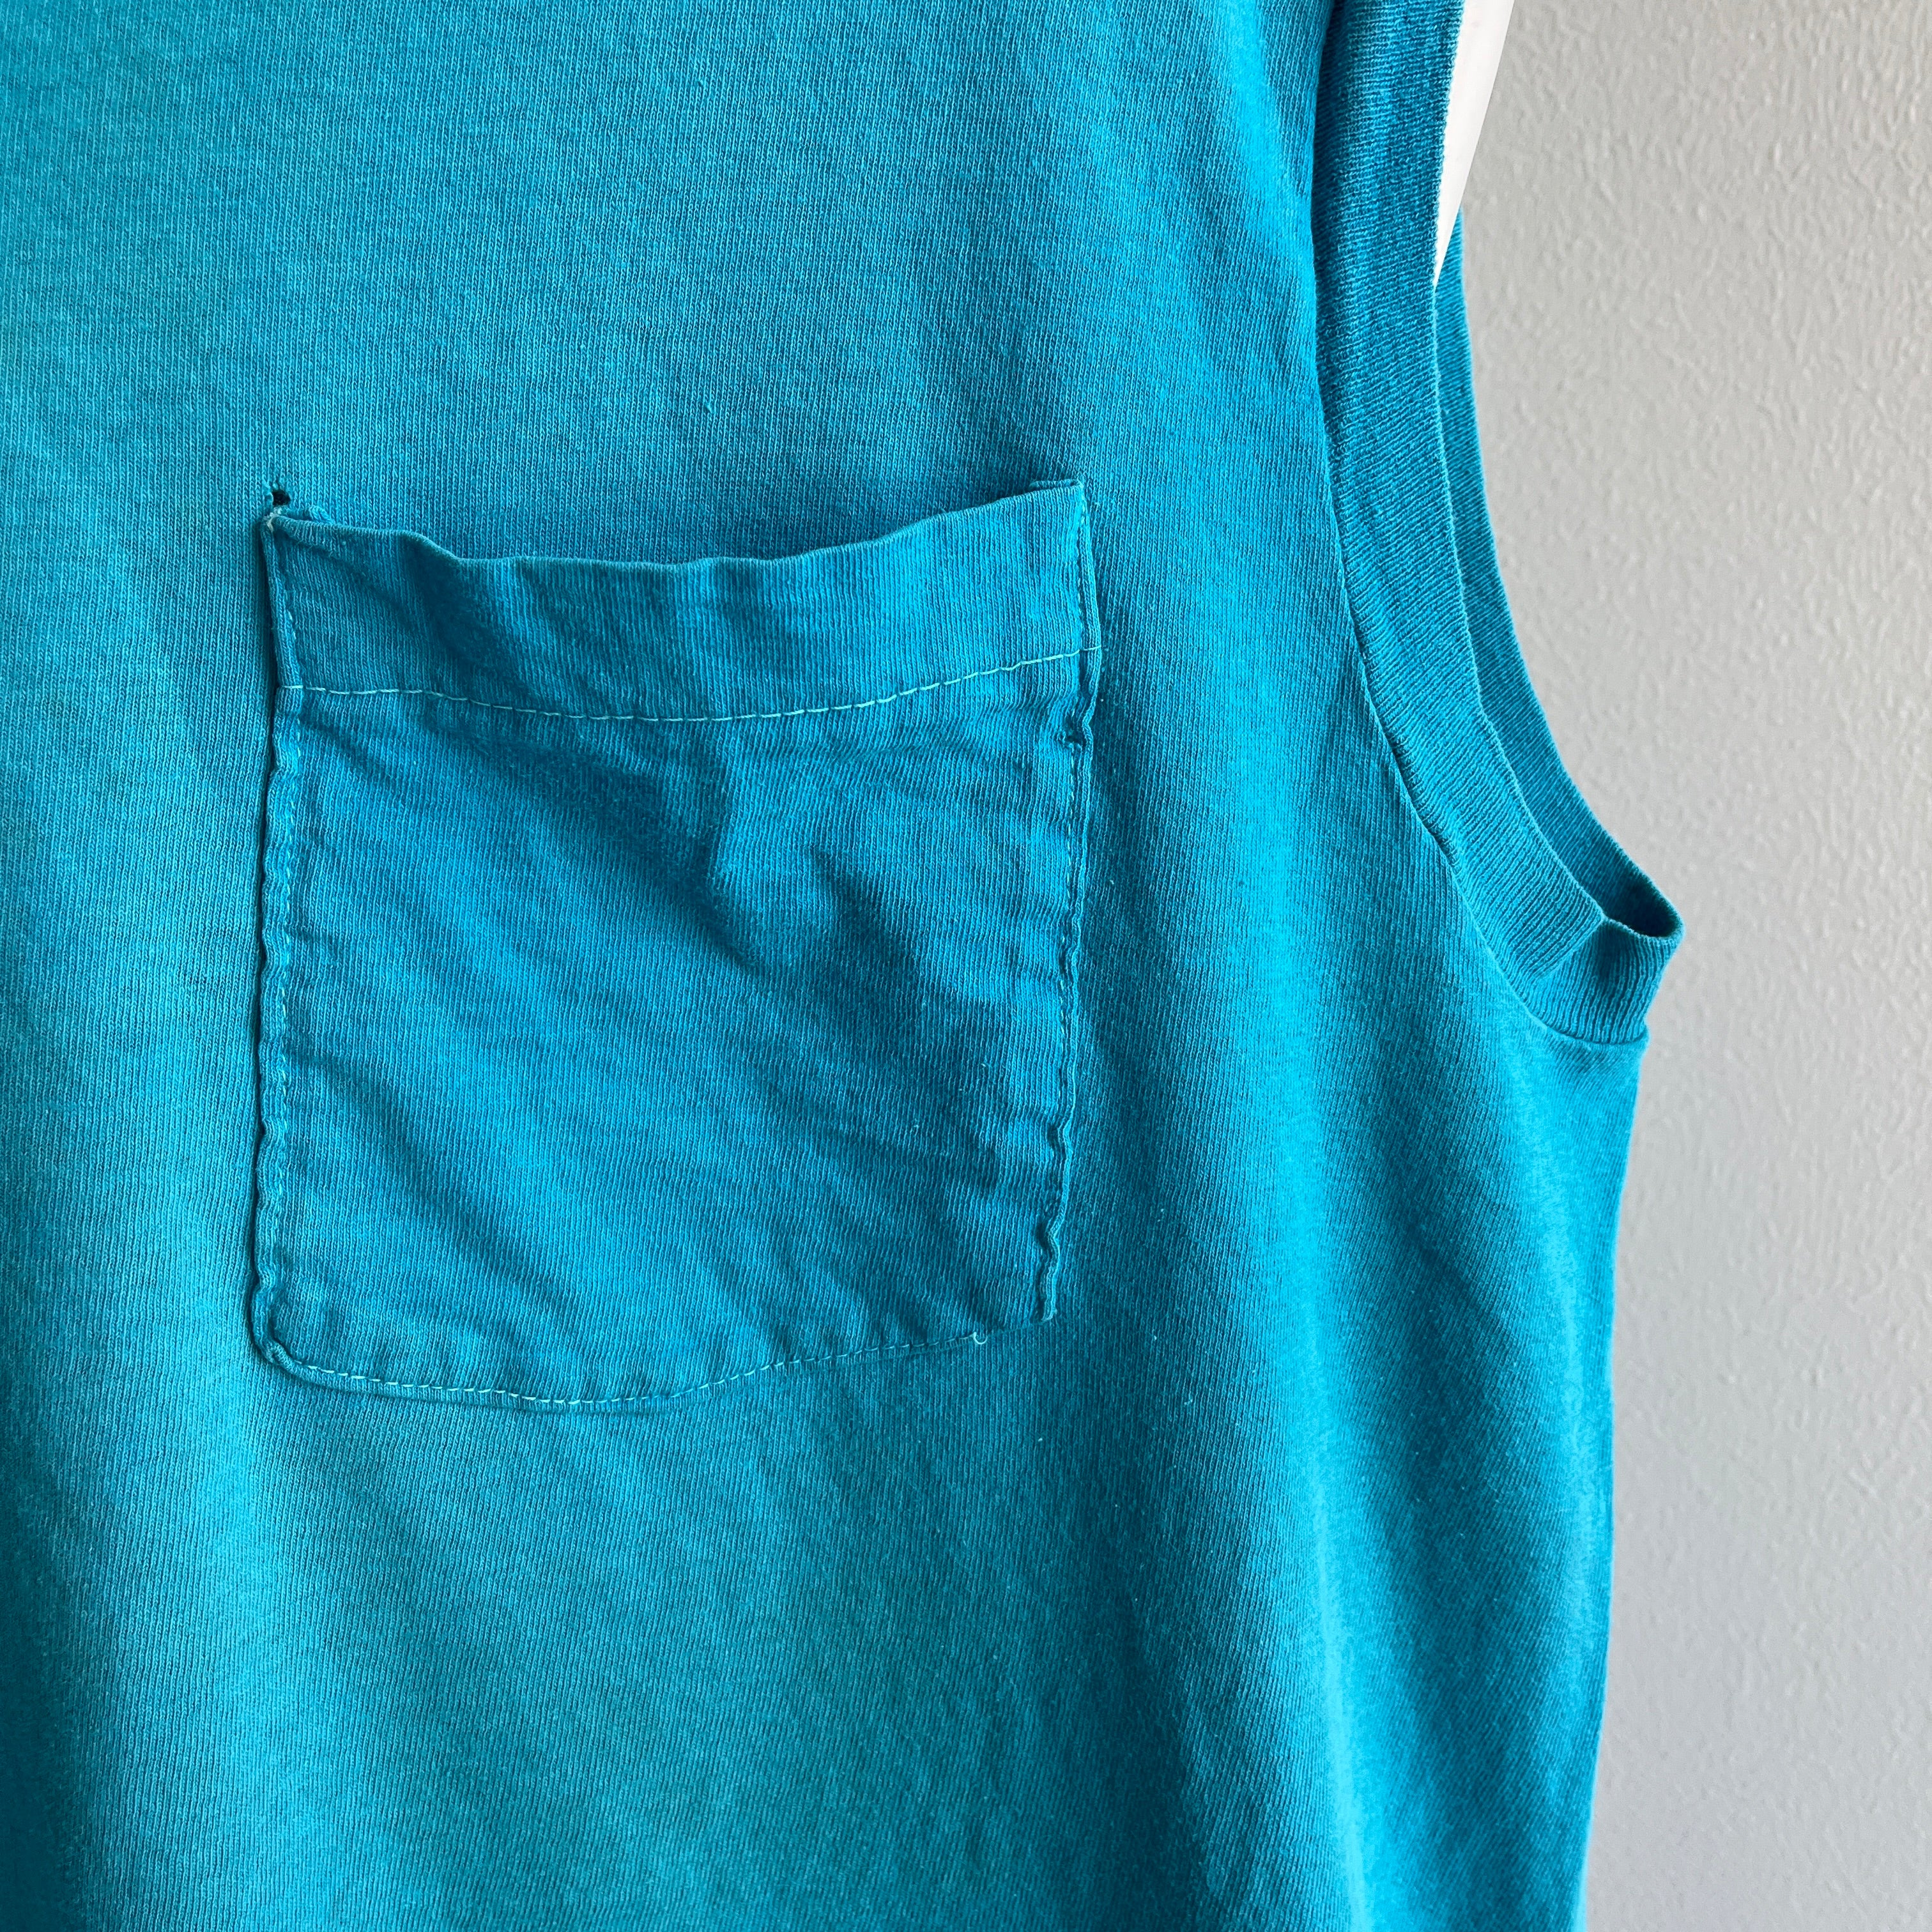 1980s Beat Up Teal Muscle Tank by FOTL - Selvedge Pocket